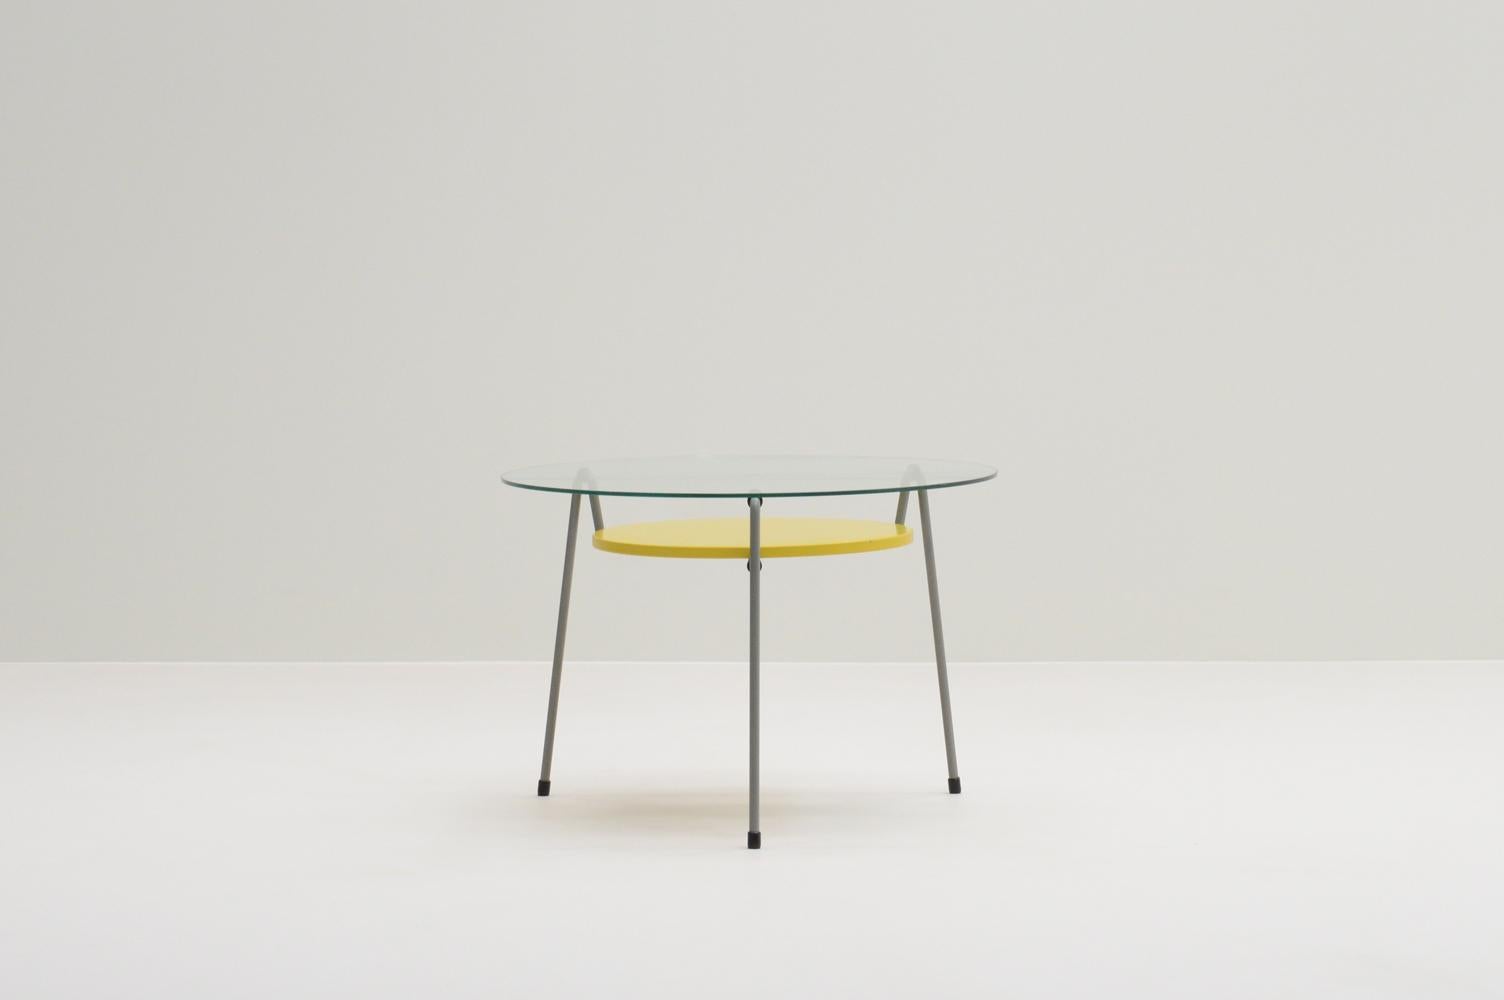 535 table by Wim Rietveld for Gispen, The Netherlands 50s. In 1953 Wim Rietveld designed the Model 535 side table, also known as the “Mug” (mosquito) table. Grey 3-legged table with yellow metal tray and its original glass top. Has been refinished